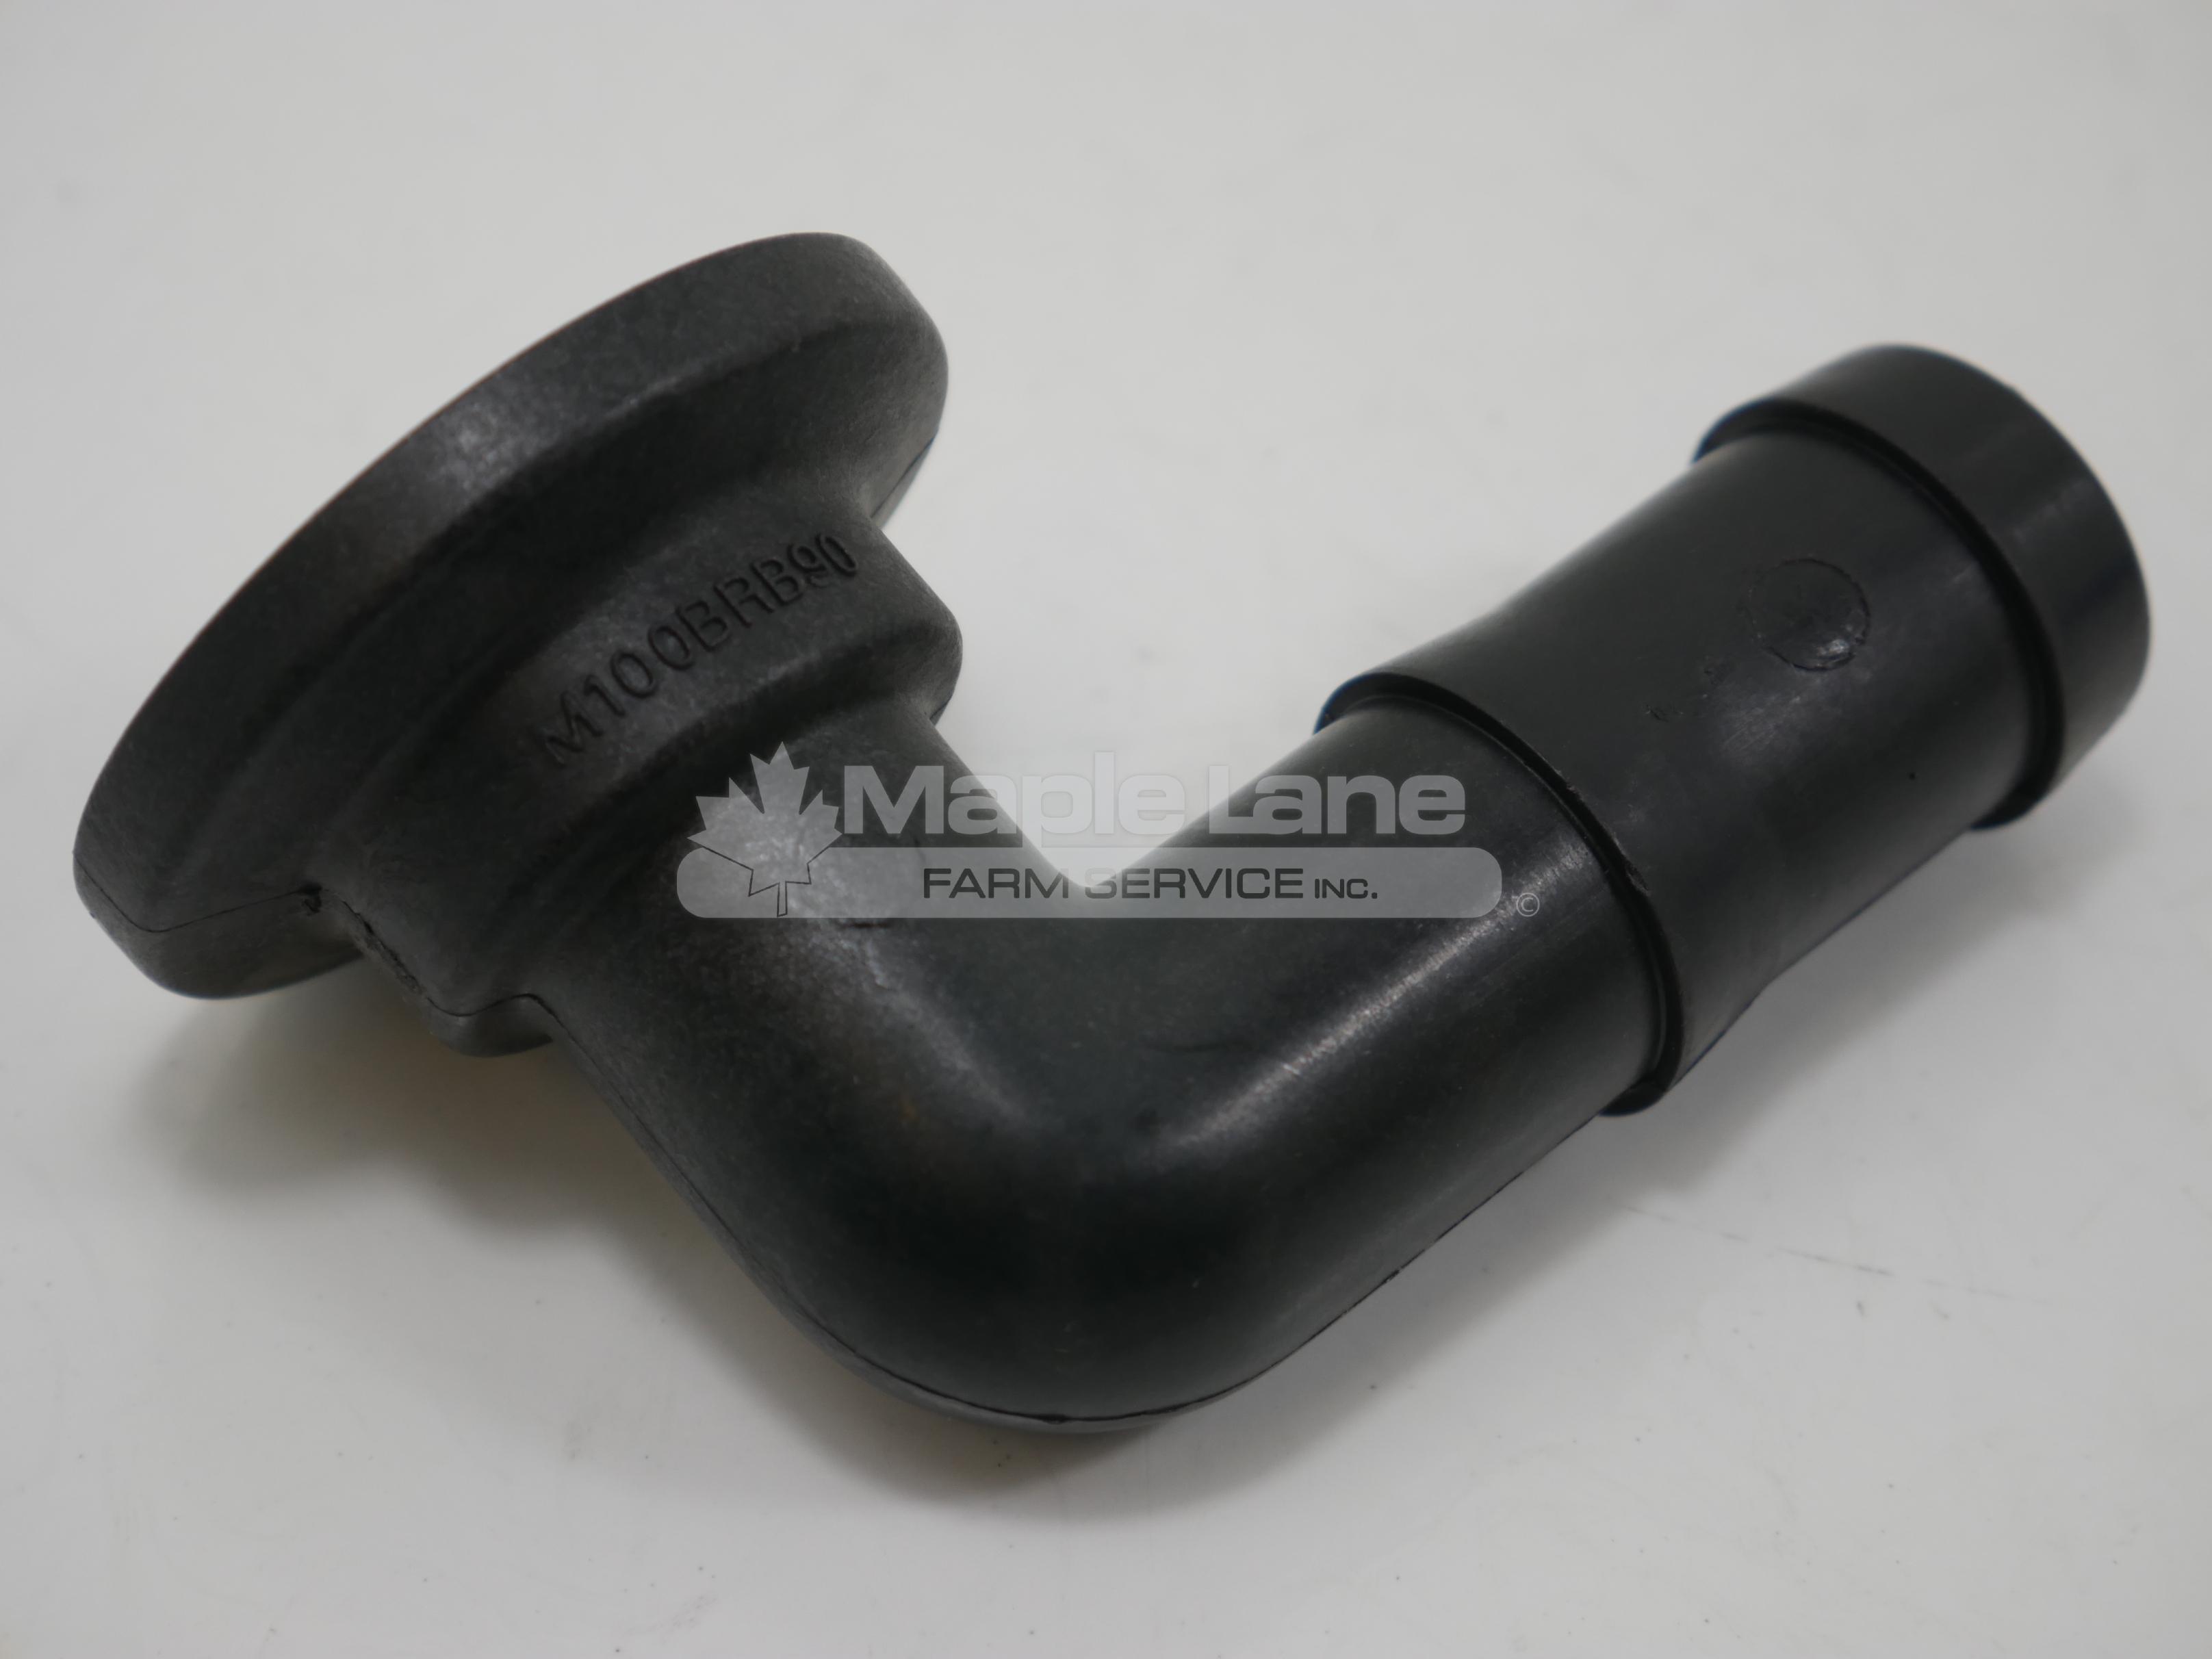 AG056272 Elbow Fitting 1" x 1"